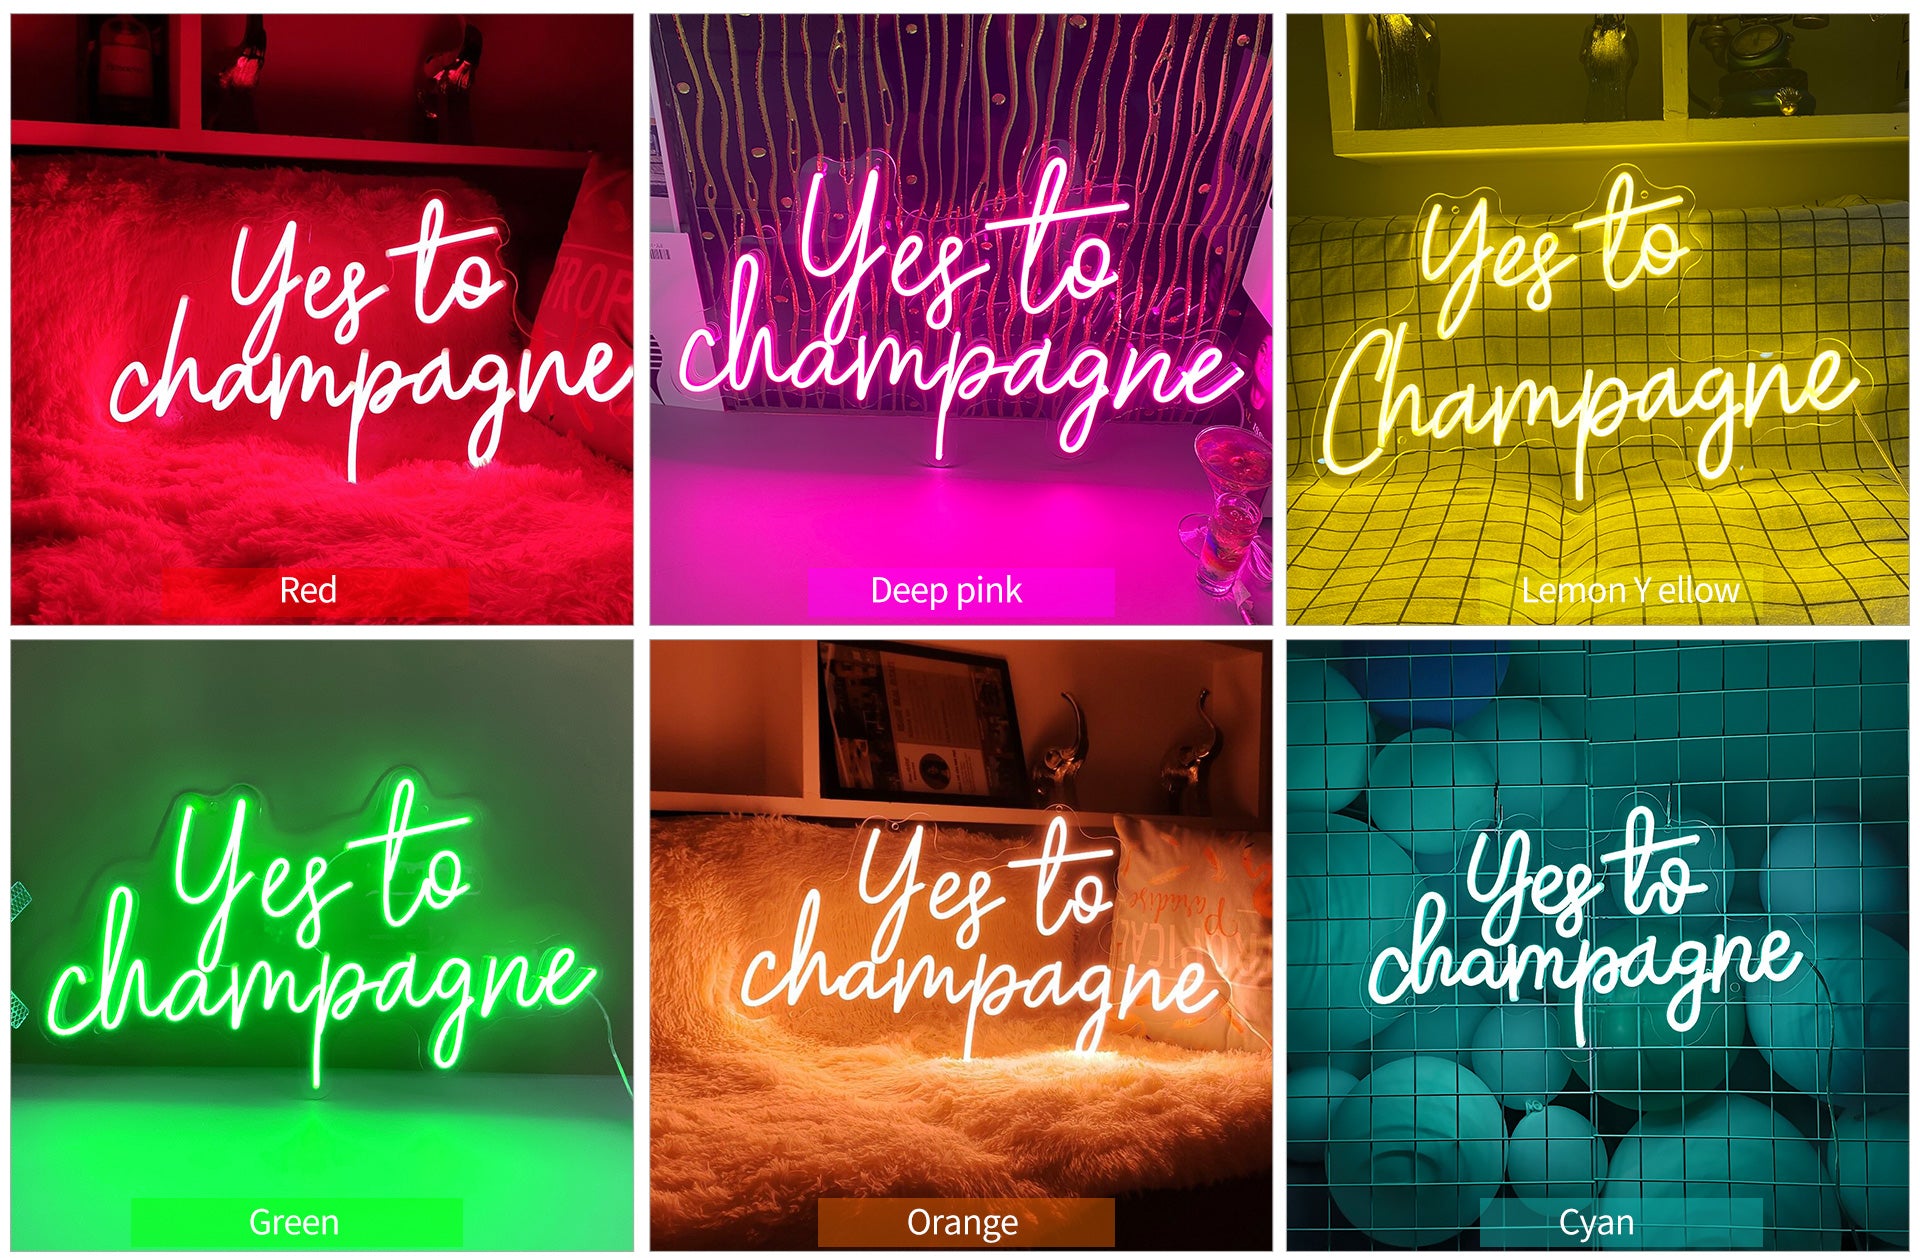 Champagne neon sign